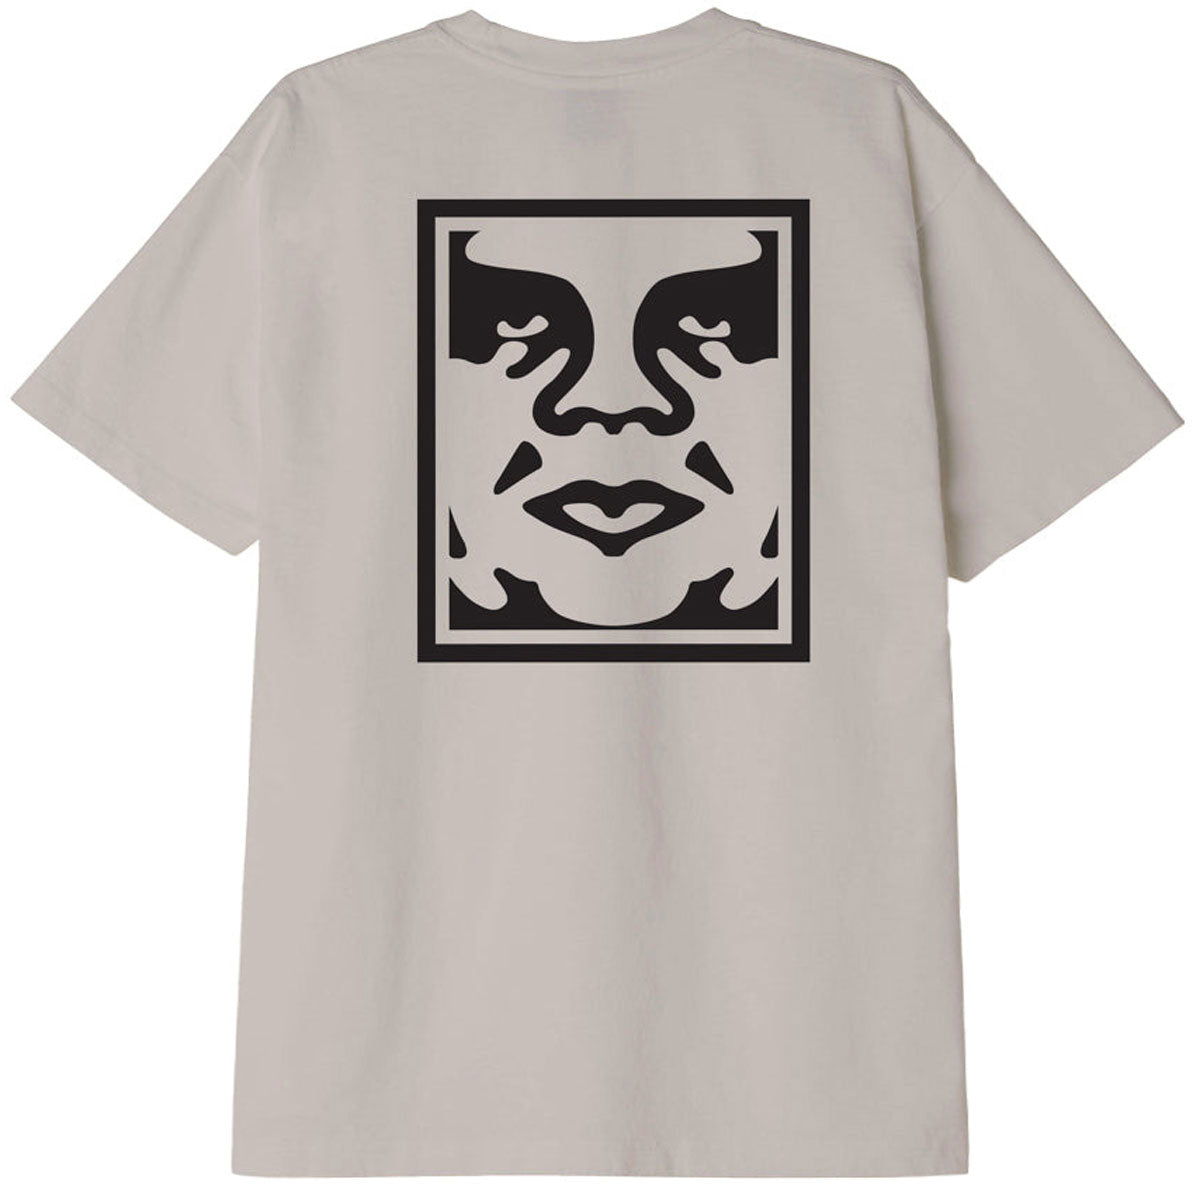 Obey Bold Icon Heavyweight T-Shirt - Silver Grey image 1